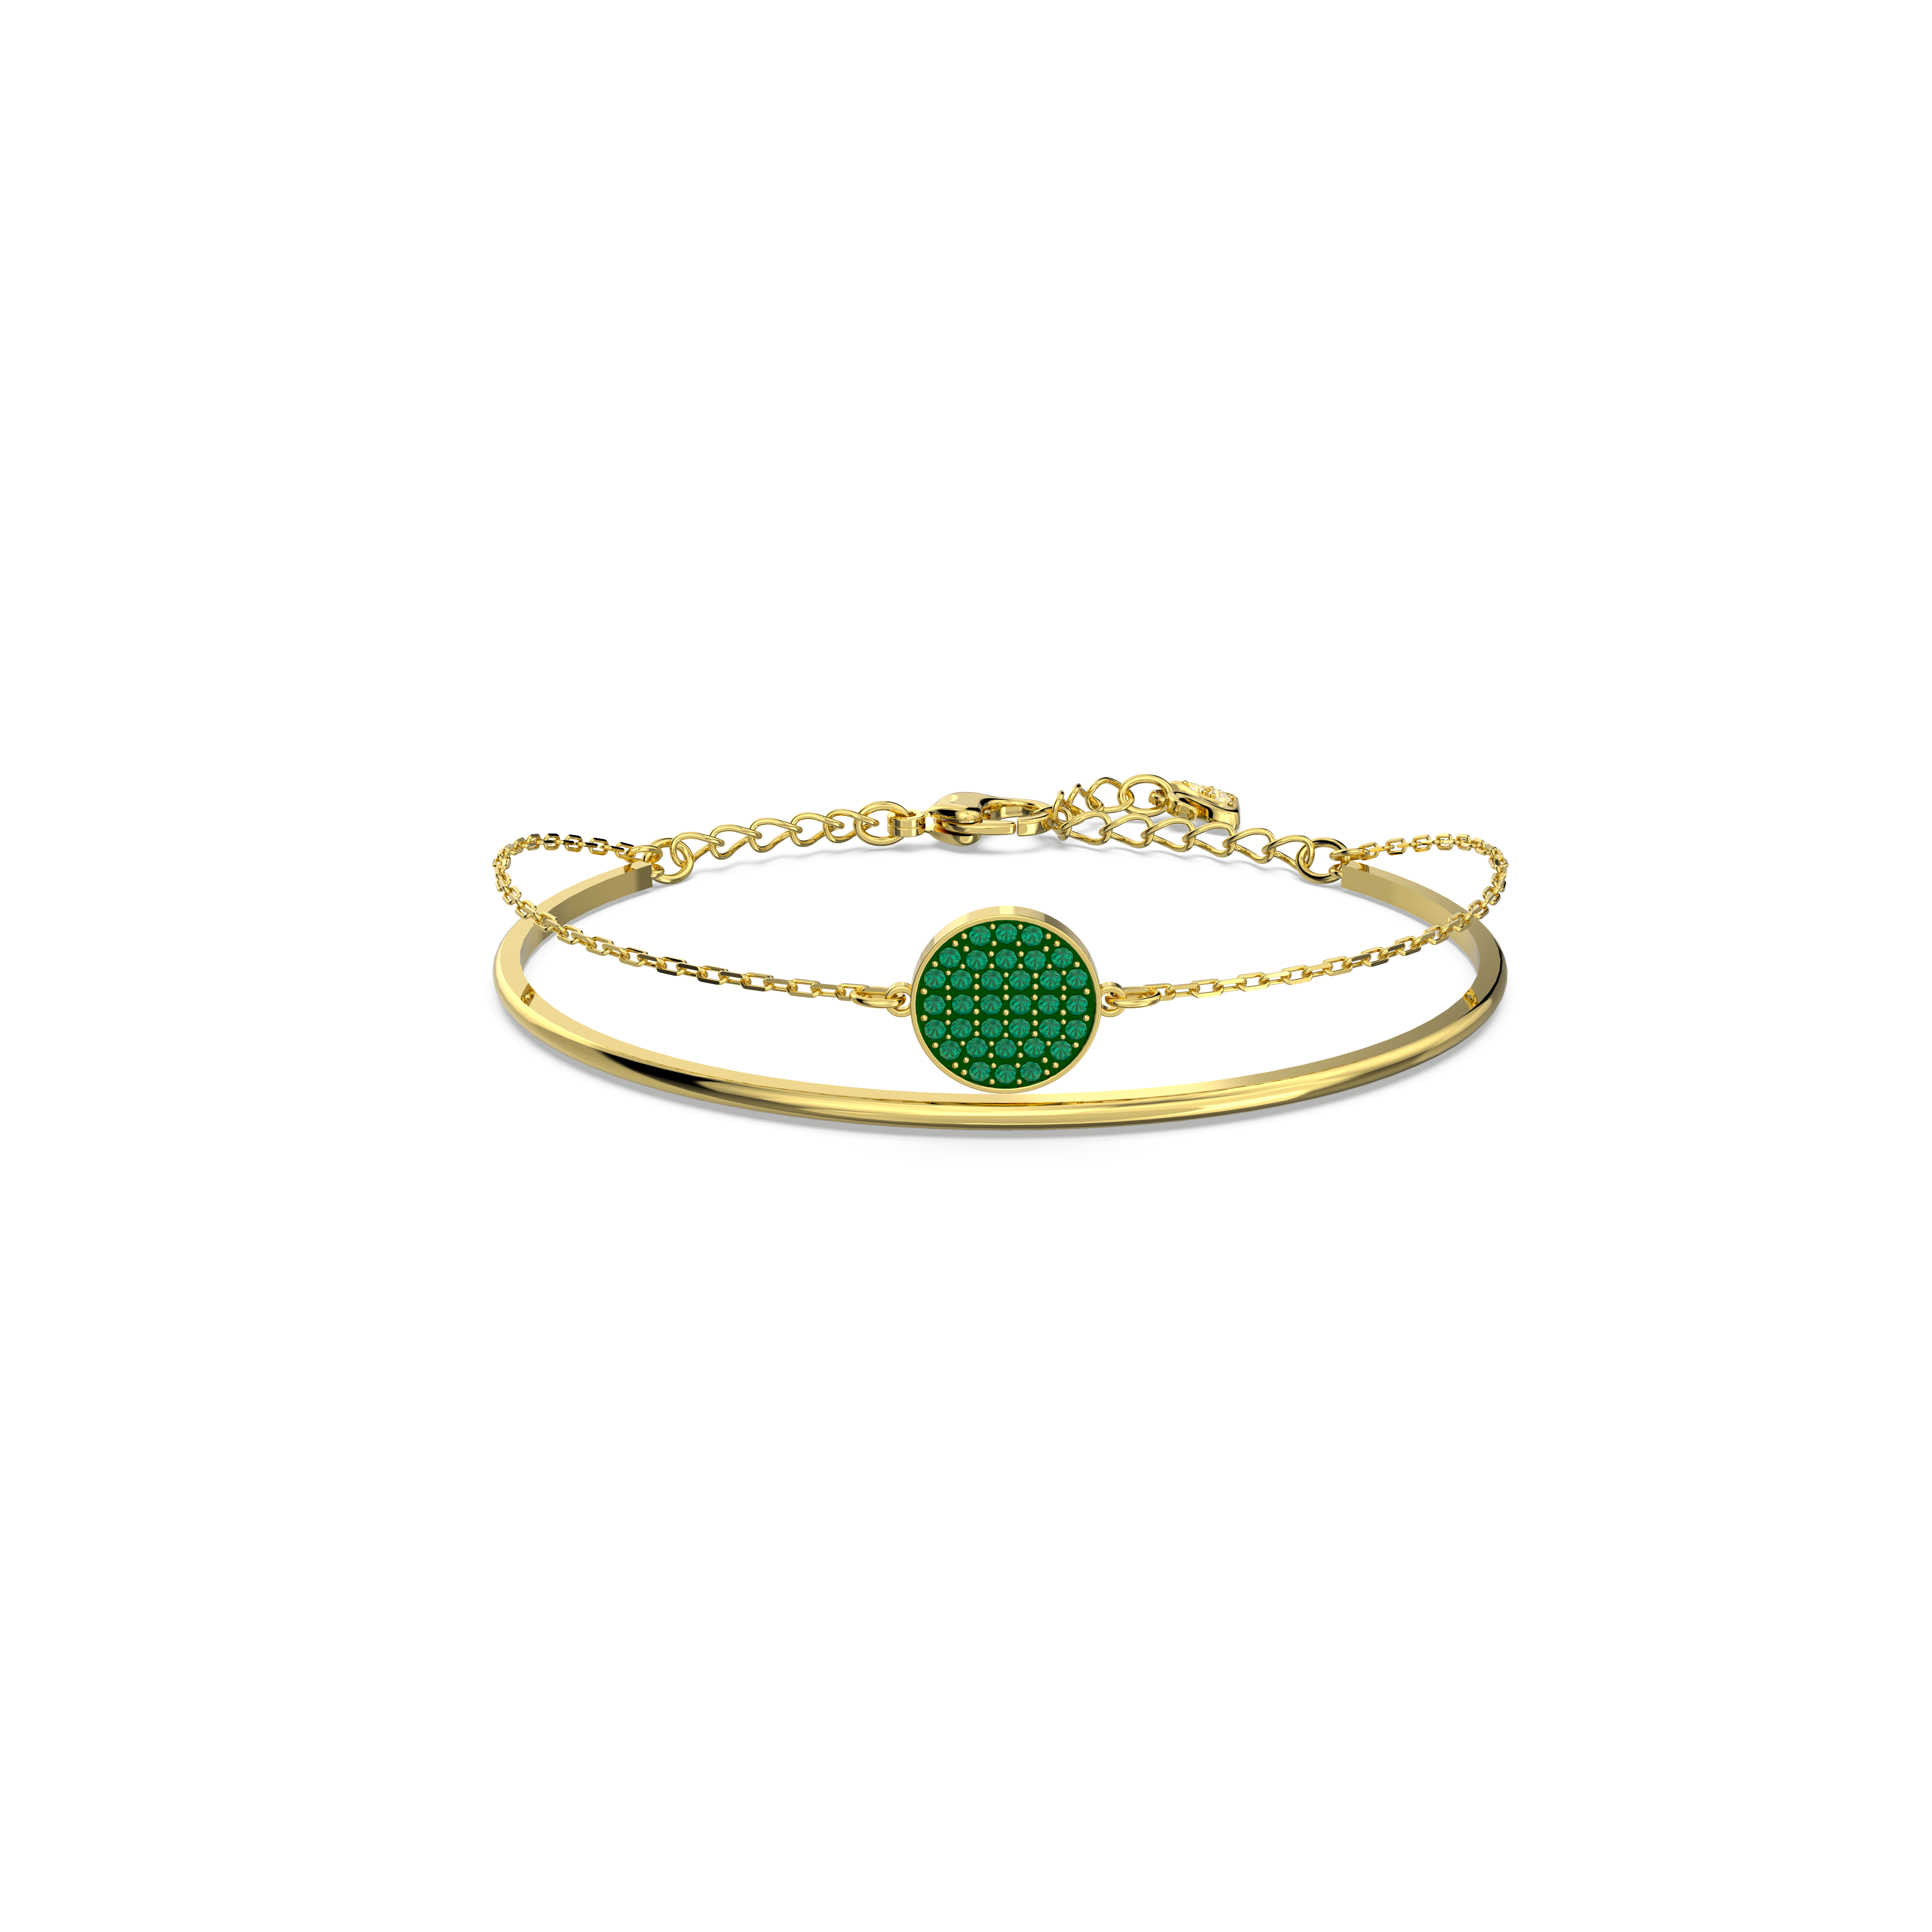 Ginger bangle, Green, Gold-tone plated by SWAROVSKI